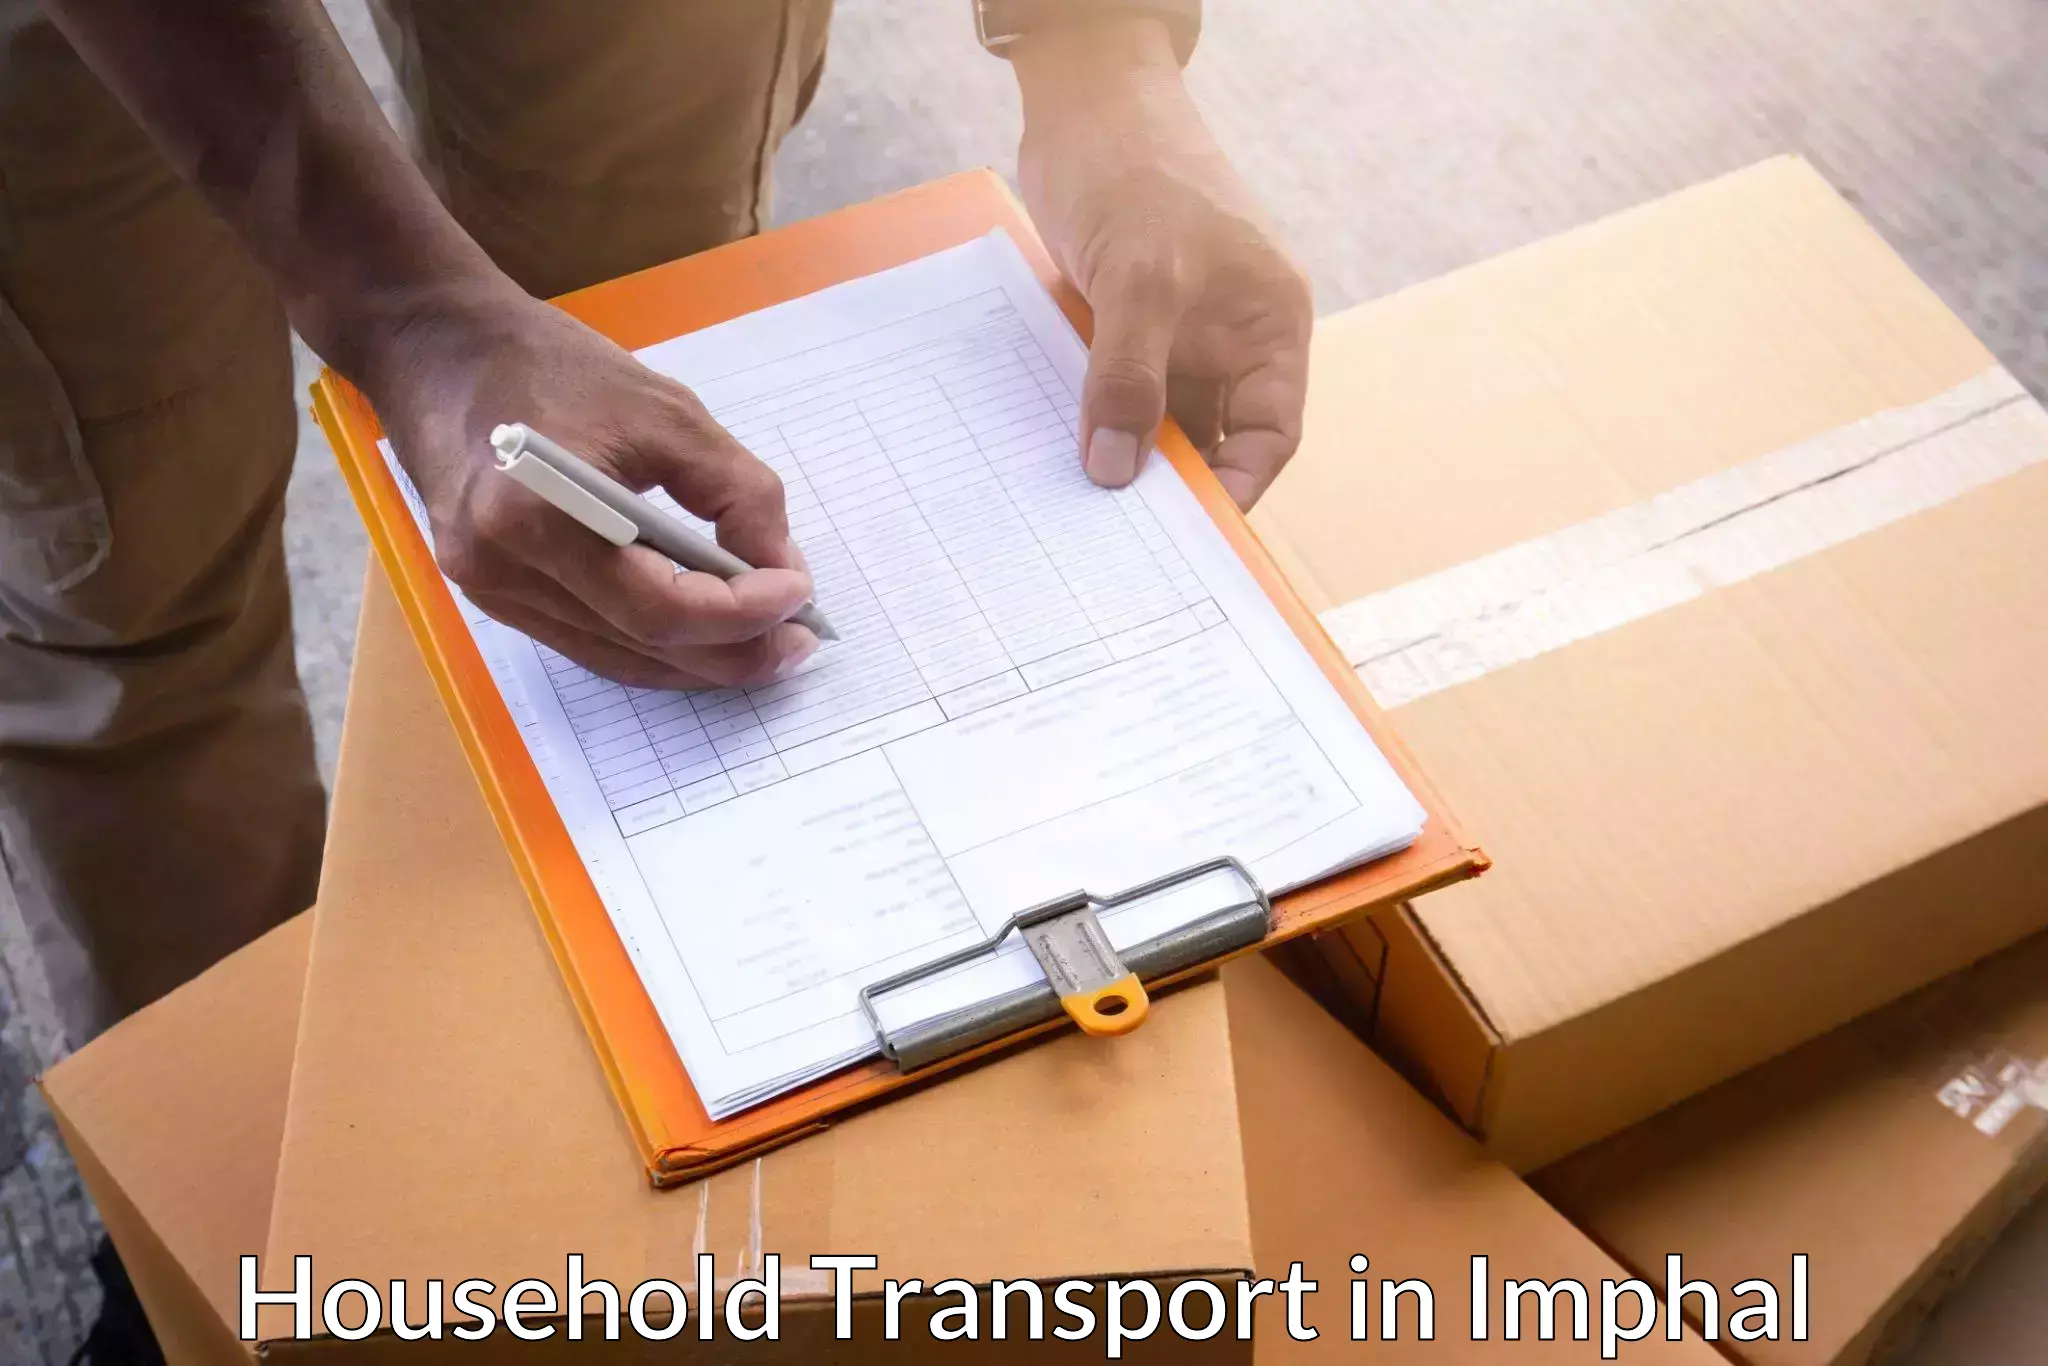 Quality furniture transport in Imphal